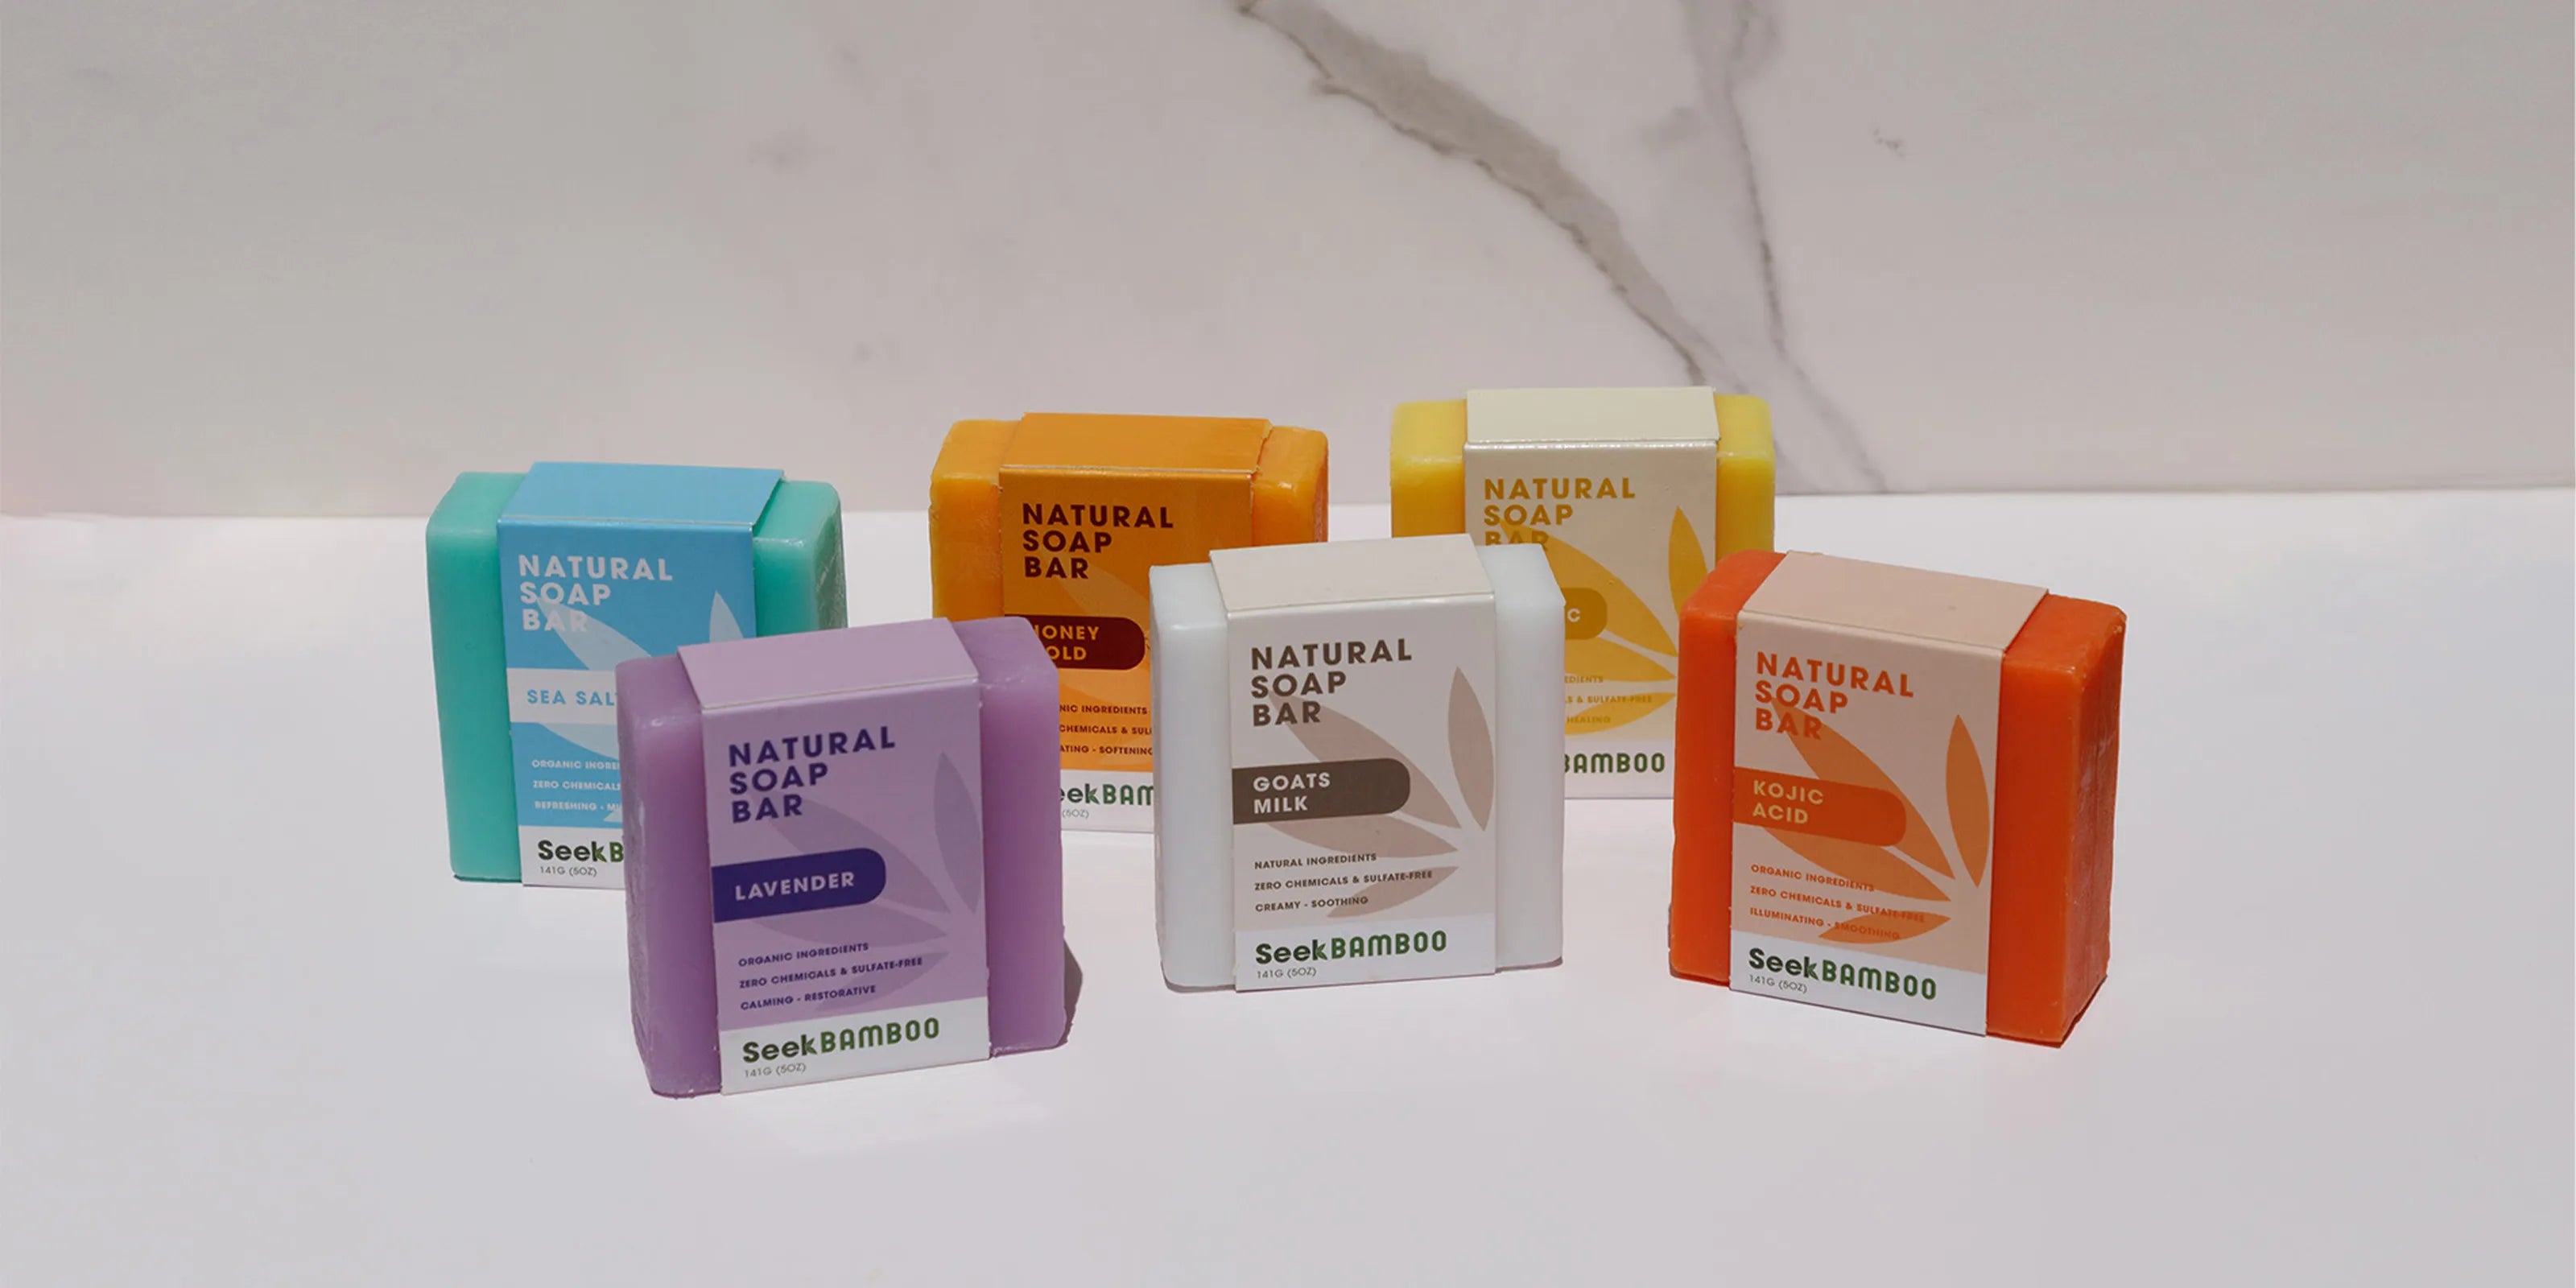 What is the best natural soap - Seek Bamboo